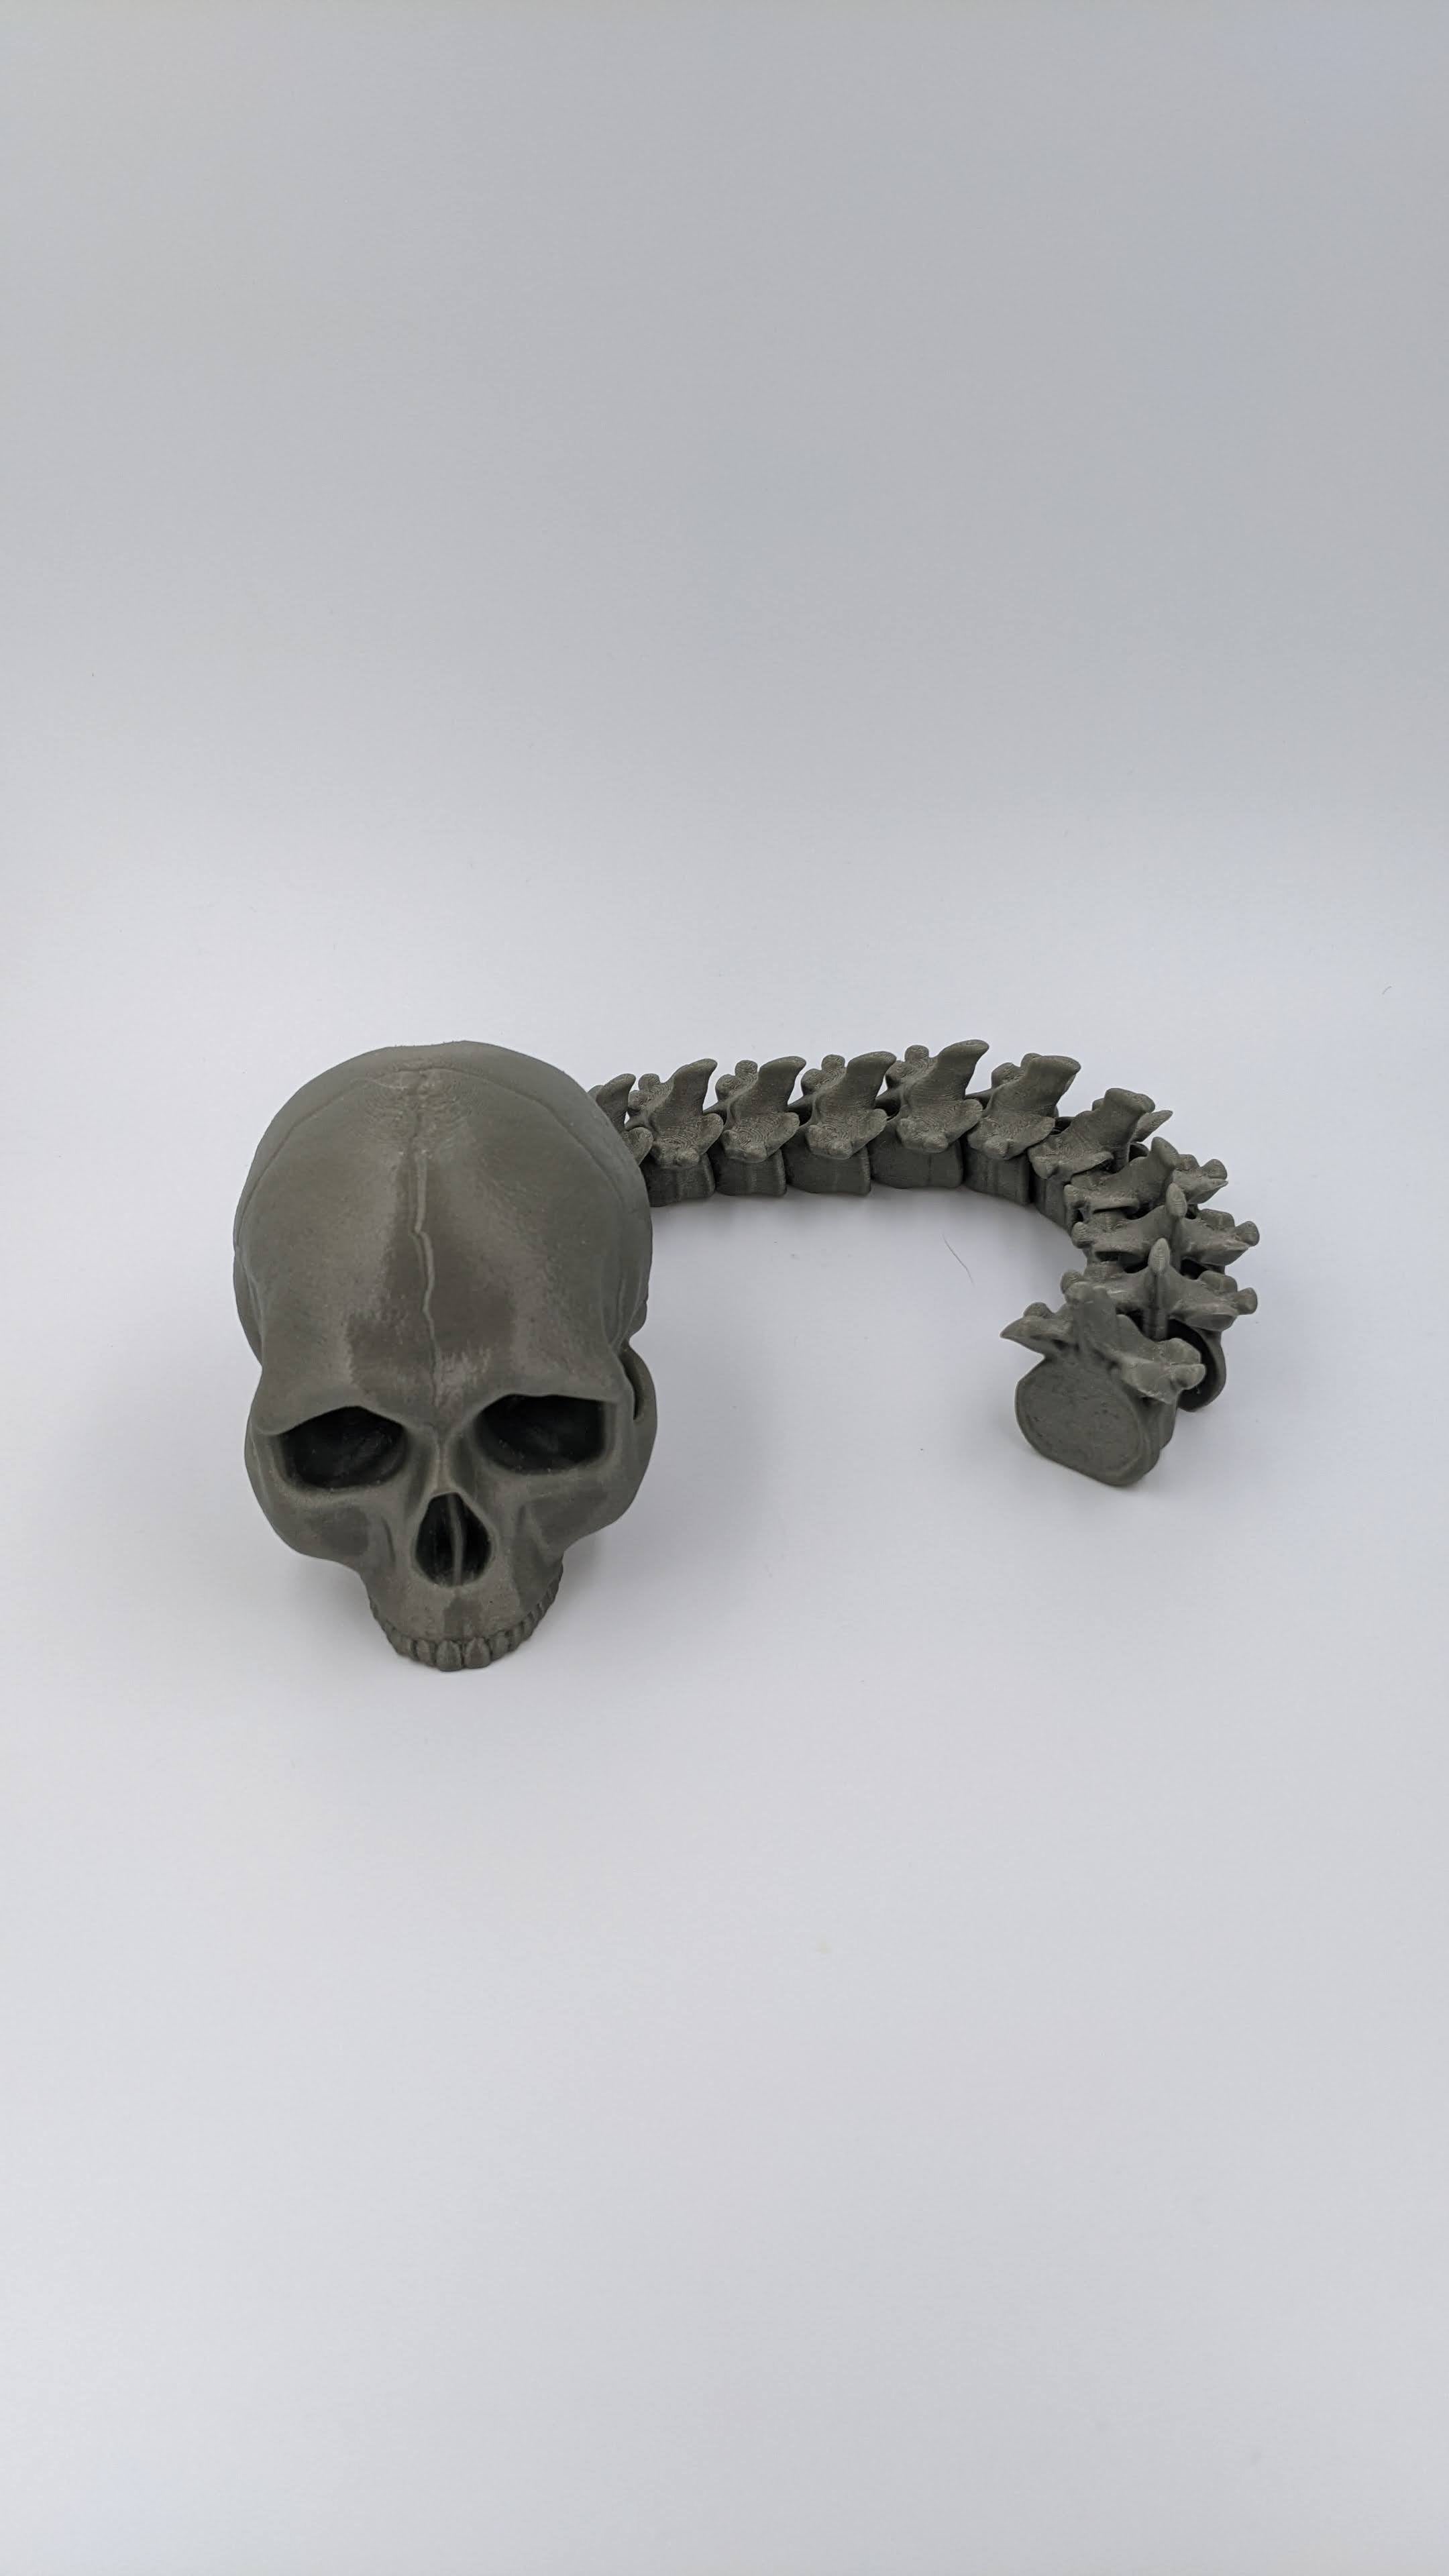 Articulated Skull and Spine Anatomy Model Realistic Medical Teaching Tool Halloween Decor